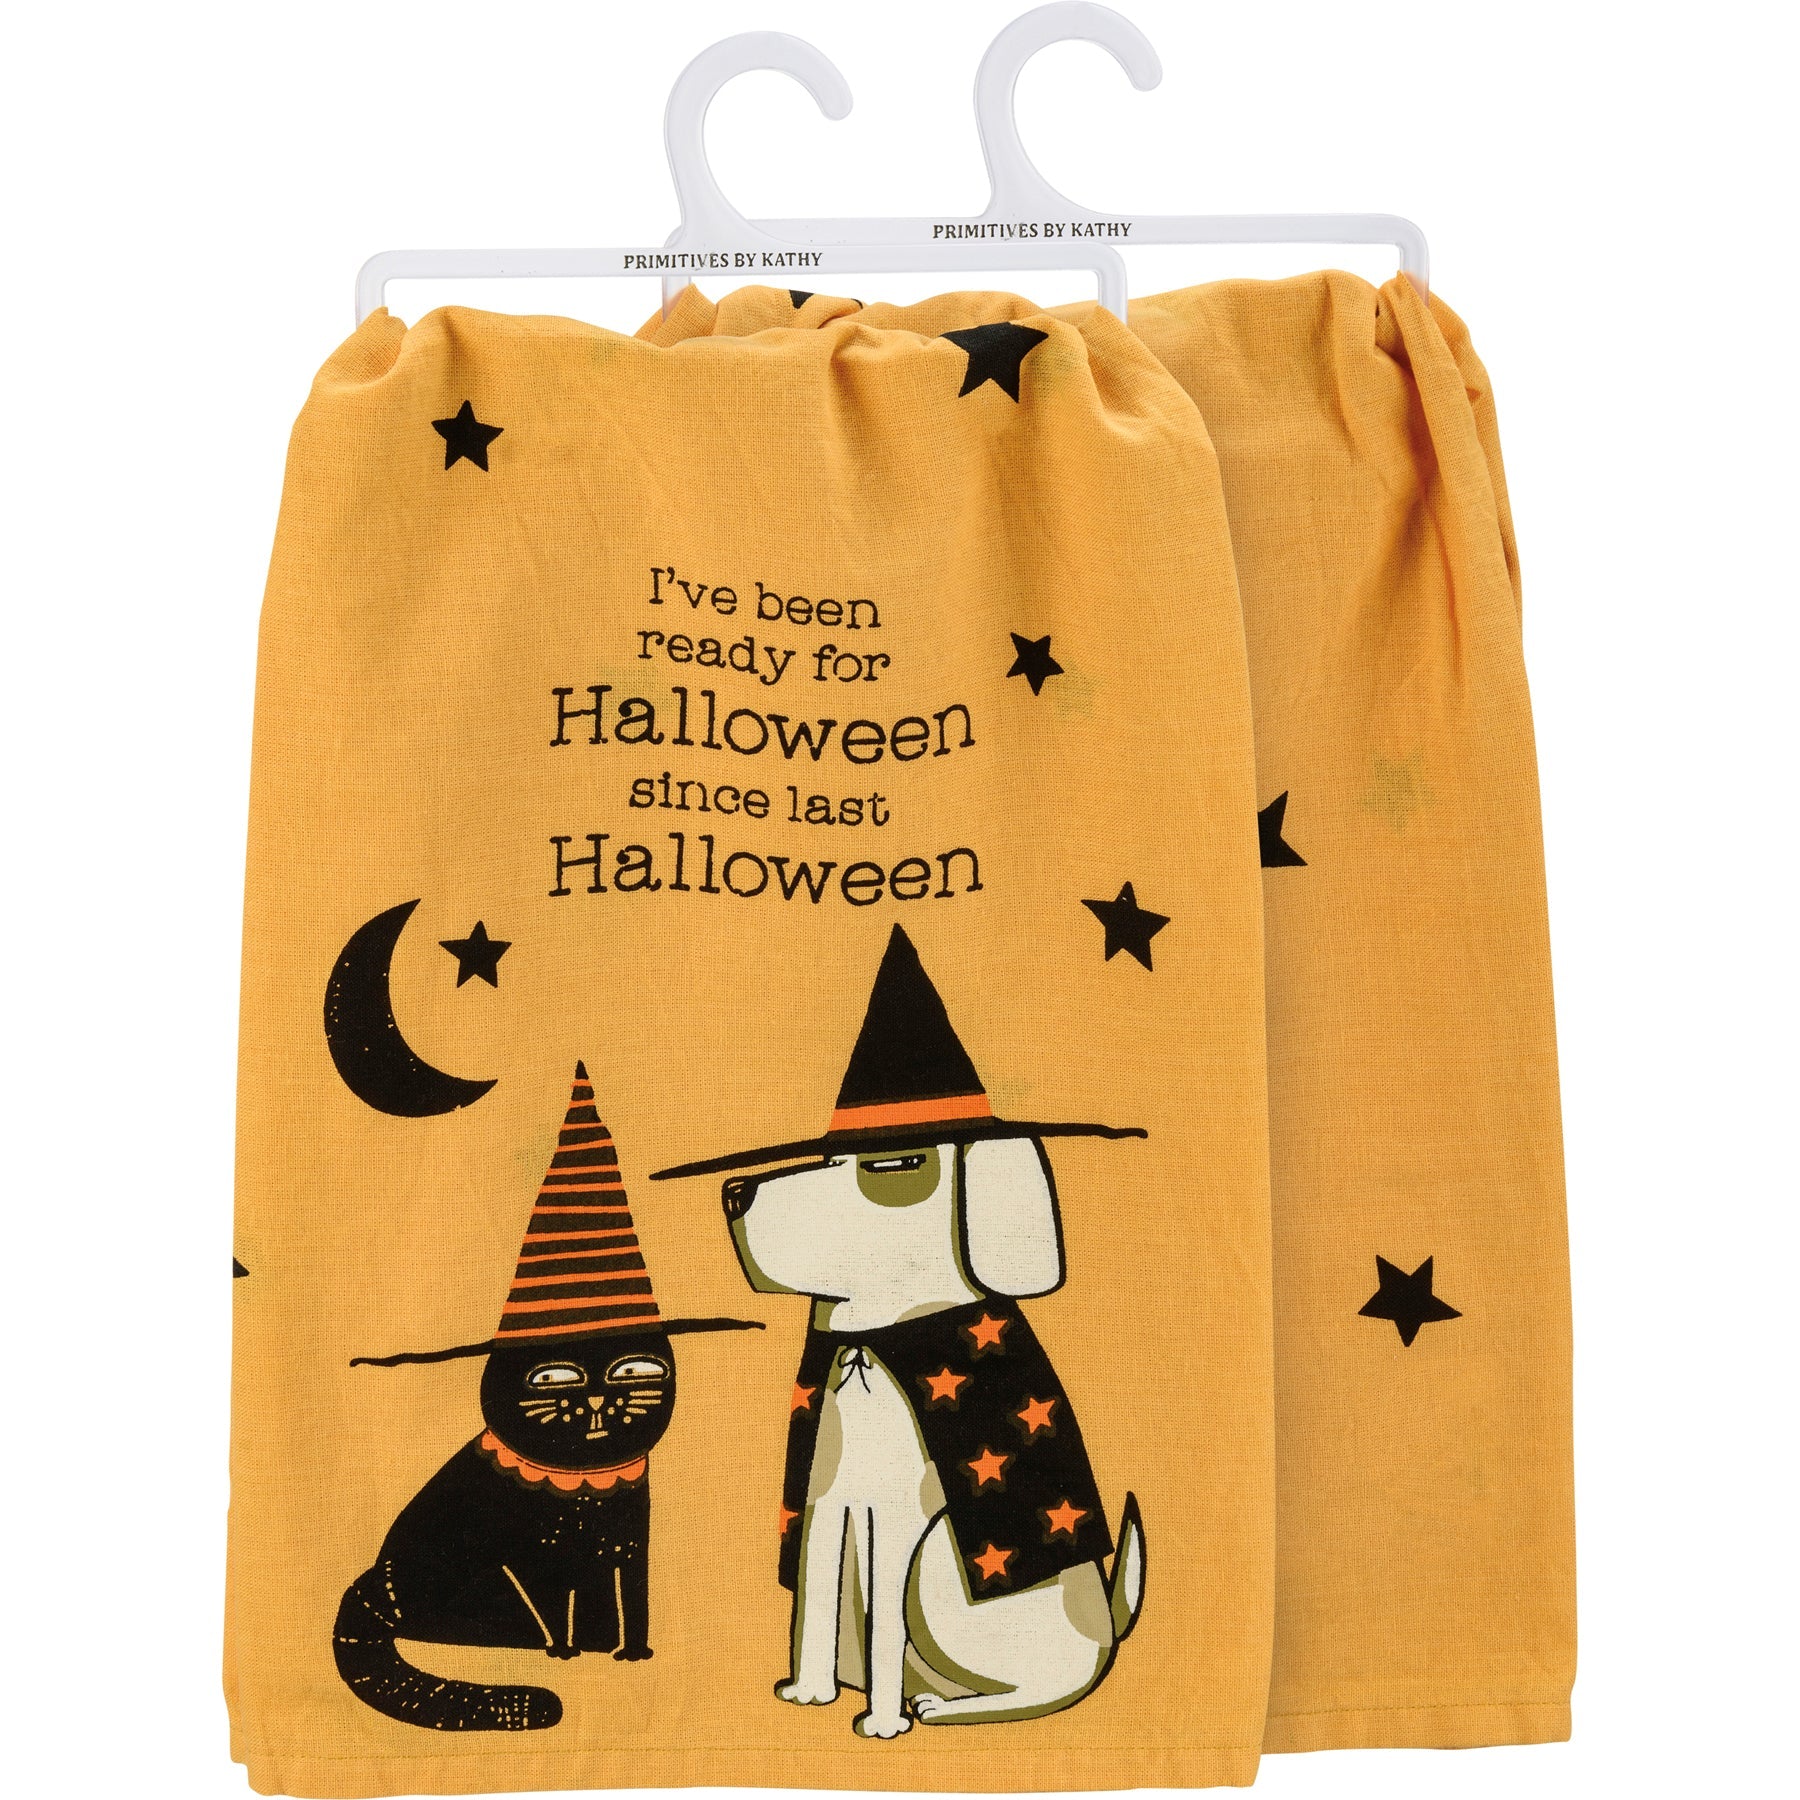 Spooky-themed dish towel with a humorous depiction of pets ready for Halloween festivities.